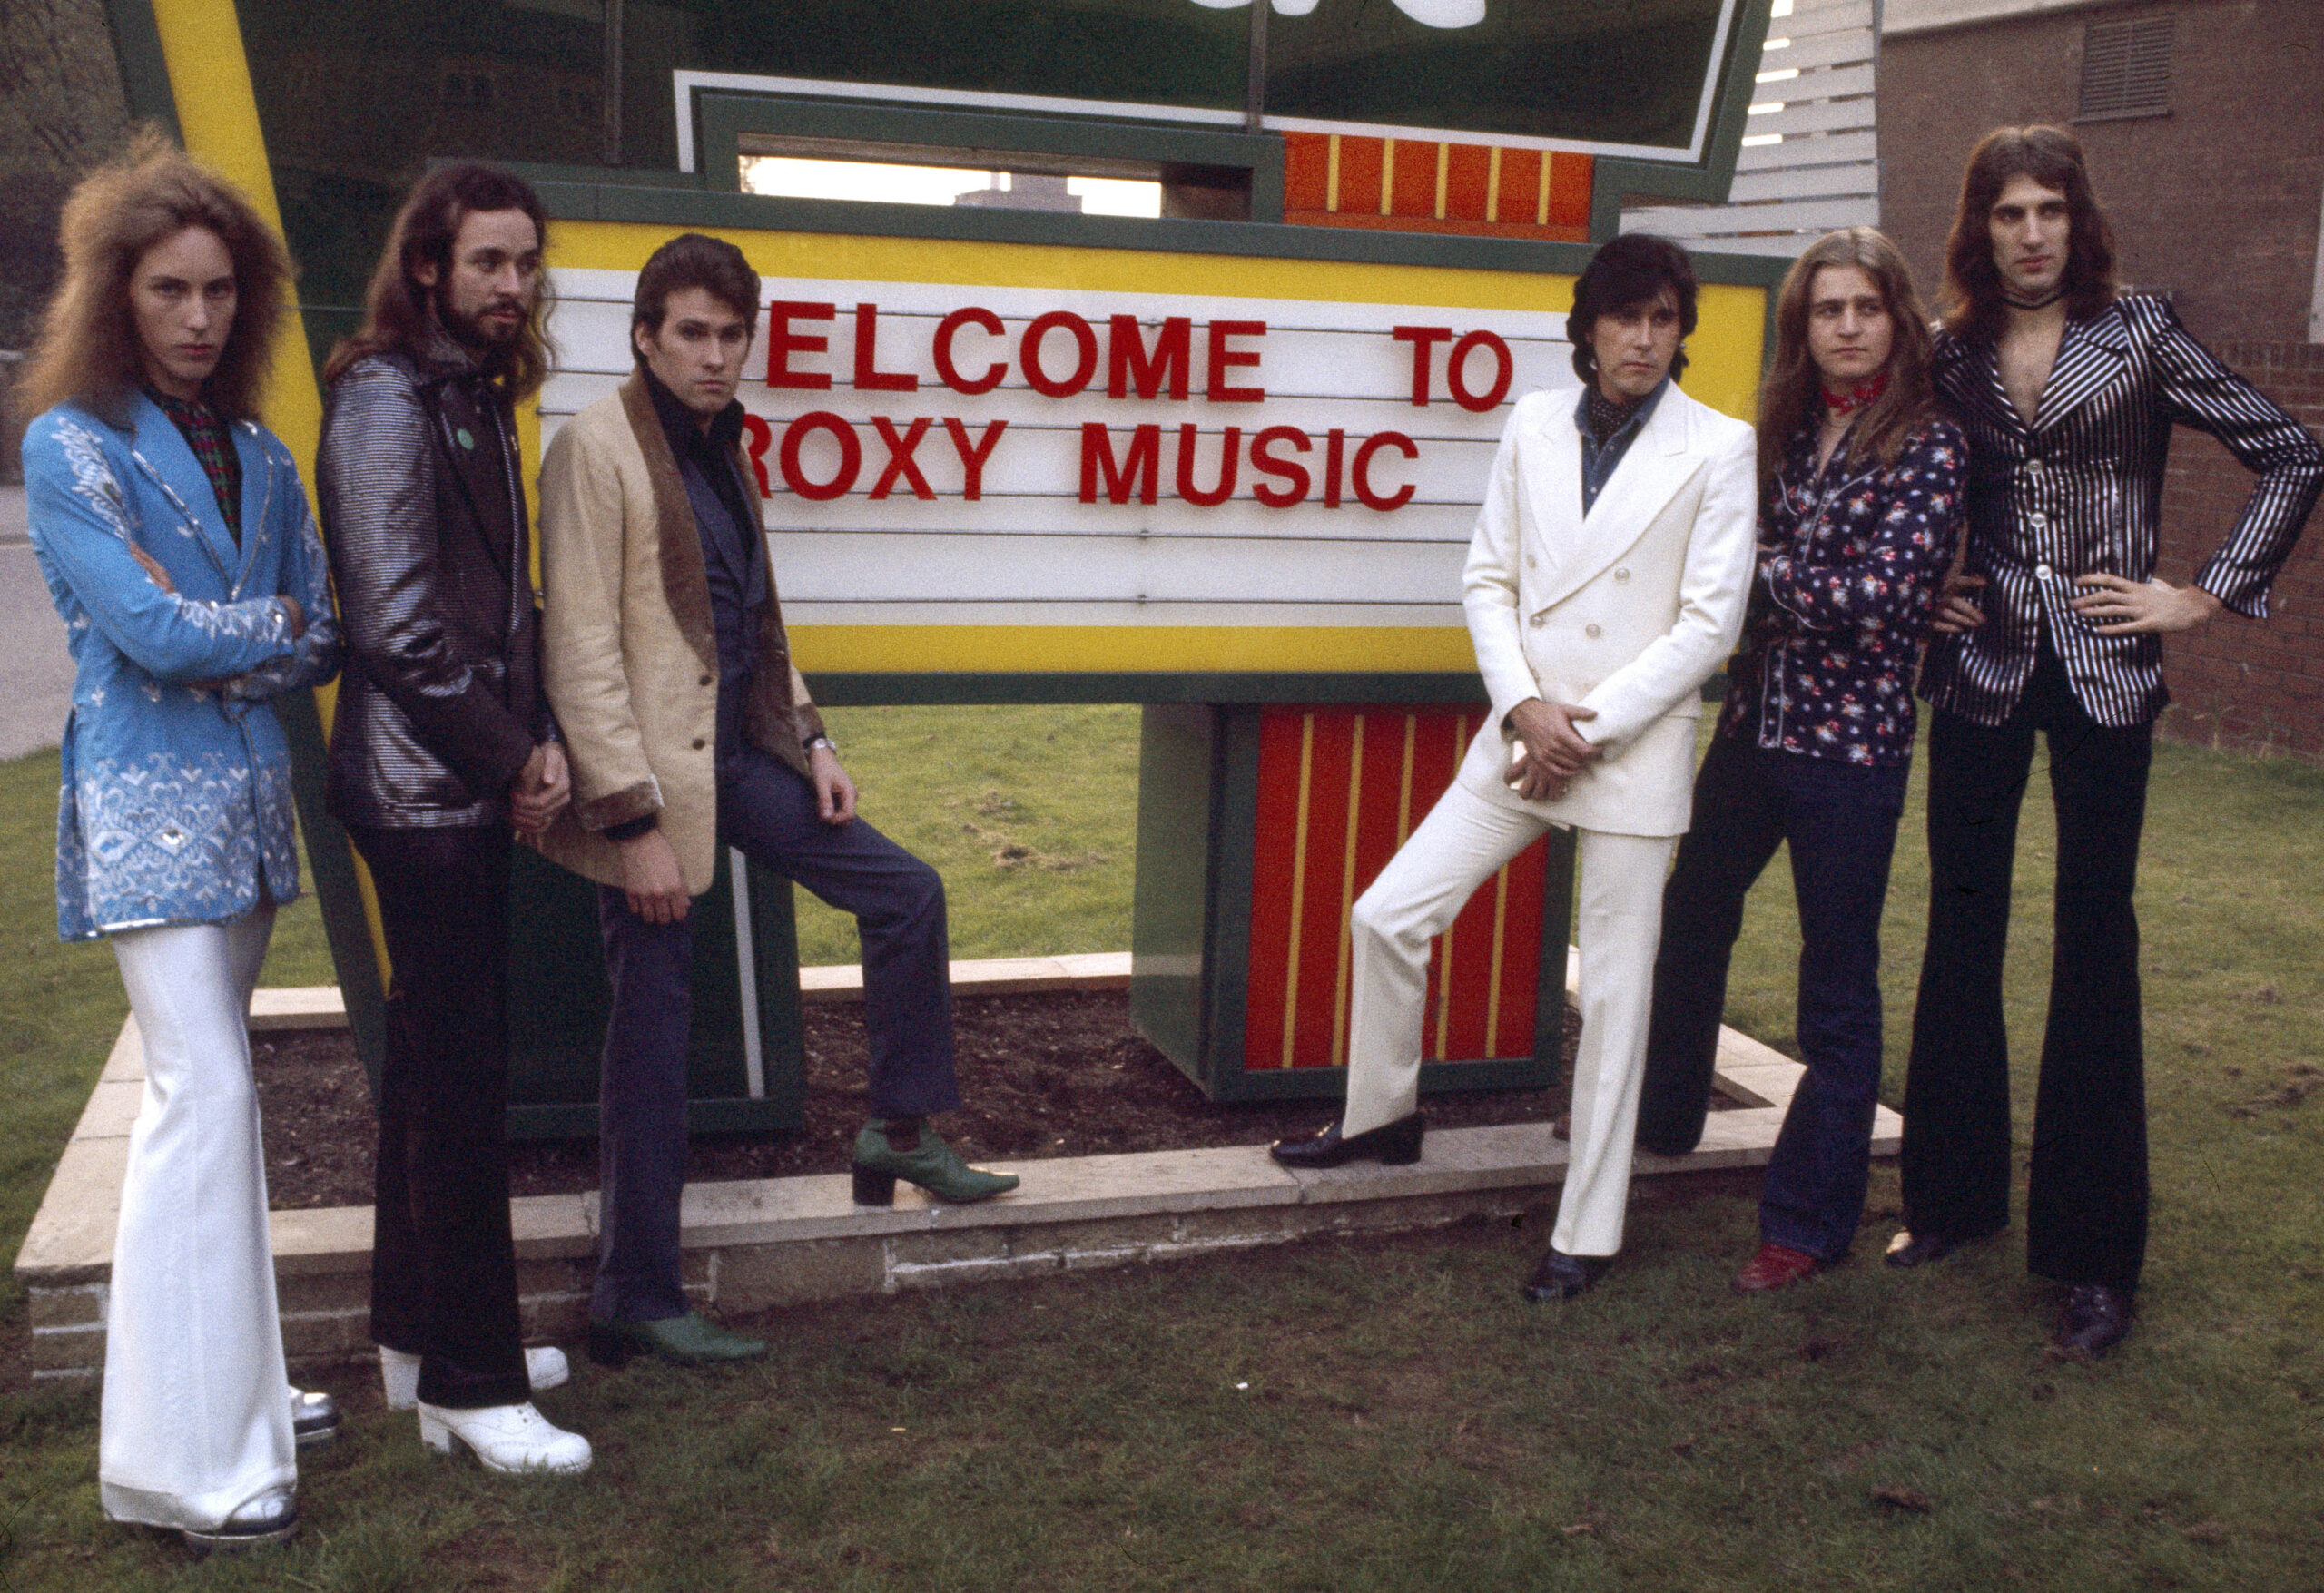 Roxy Music Wrap Up 50th Anniversary Tour With a Look Back at Their Underrated Influence